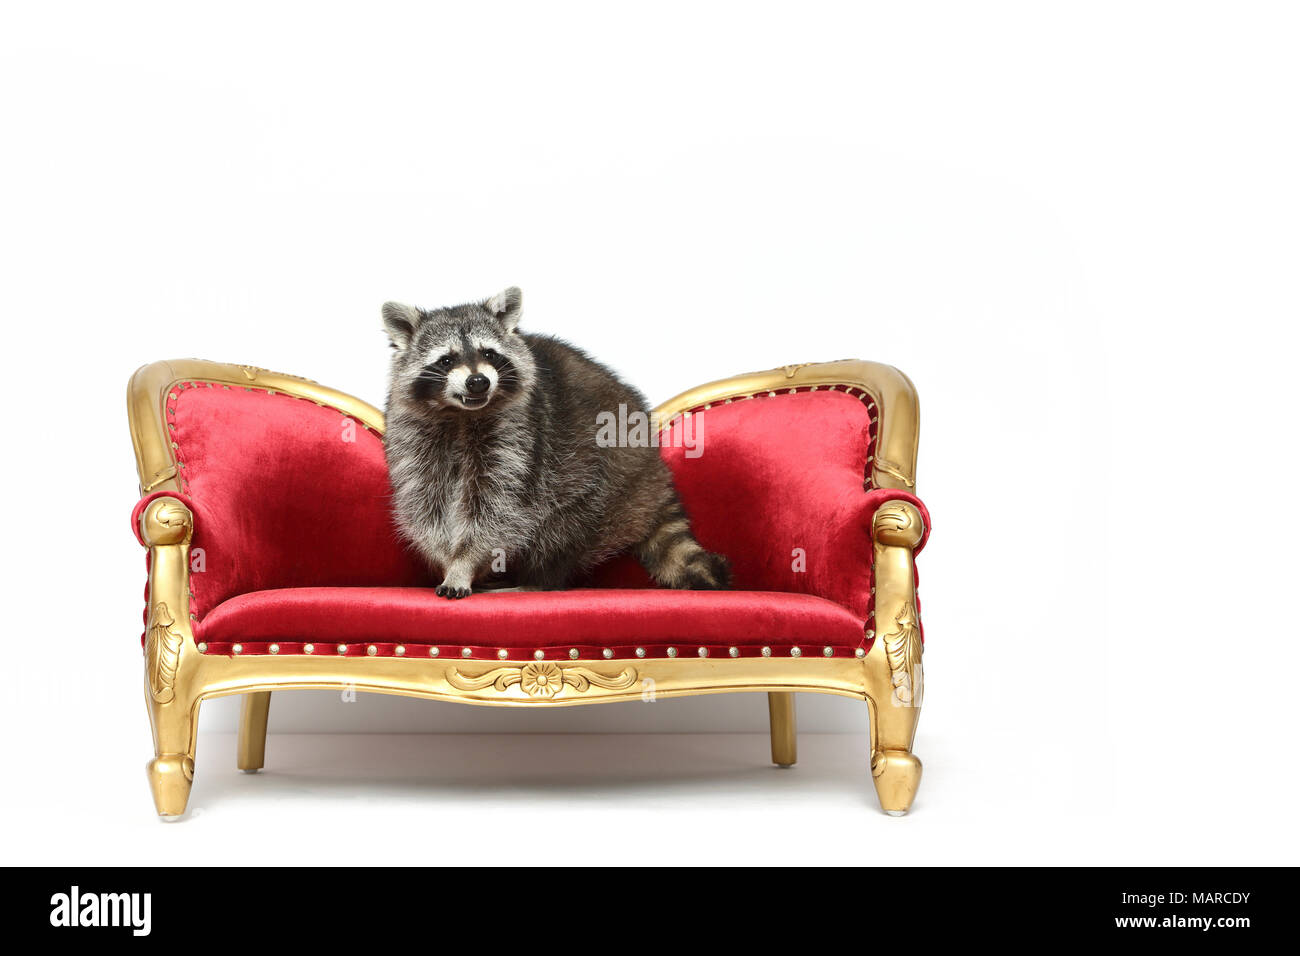 Raccoon (Procyon lotor). Adult standing on a baroque couch. Studio picture against a white background. Germany Stock Photo